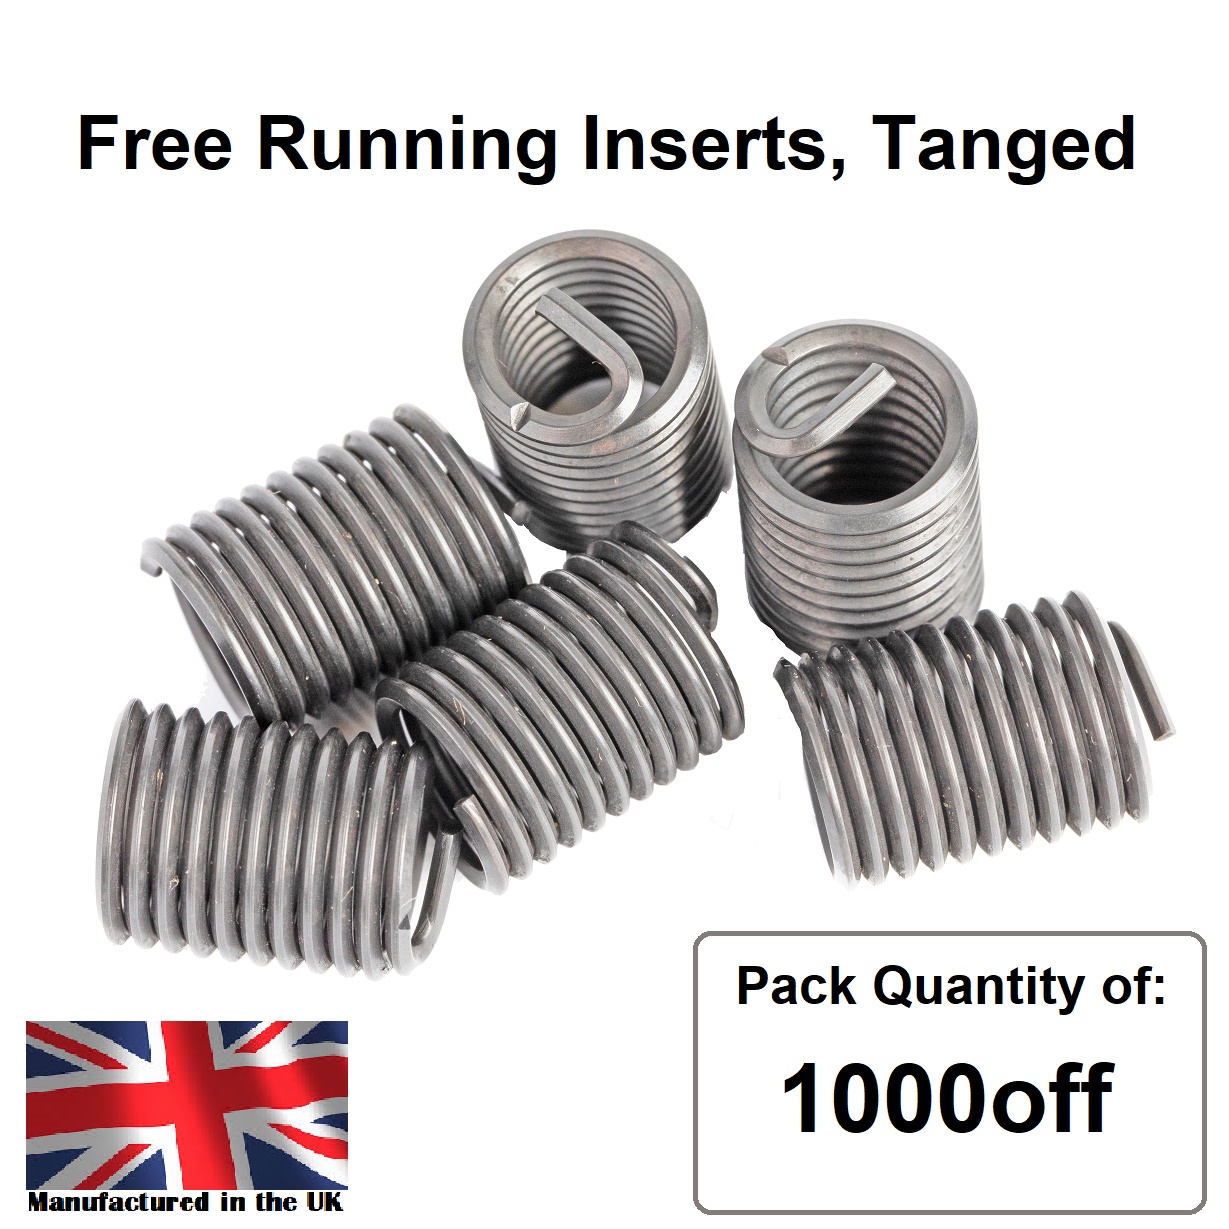 7/16 x 14 x 1D UNC, Free Running, Tanged, Wire Thread Repair Insert, 304/A2 Stainless (Pack 1000)